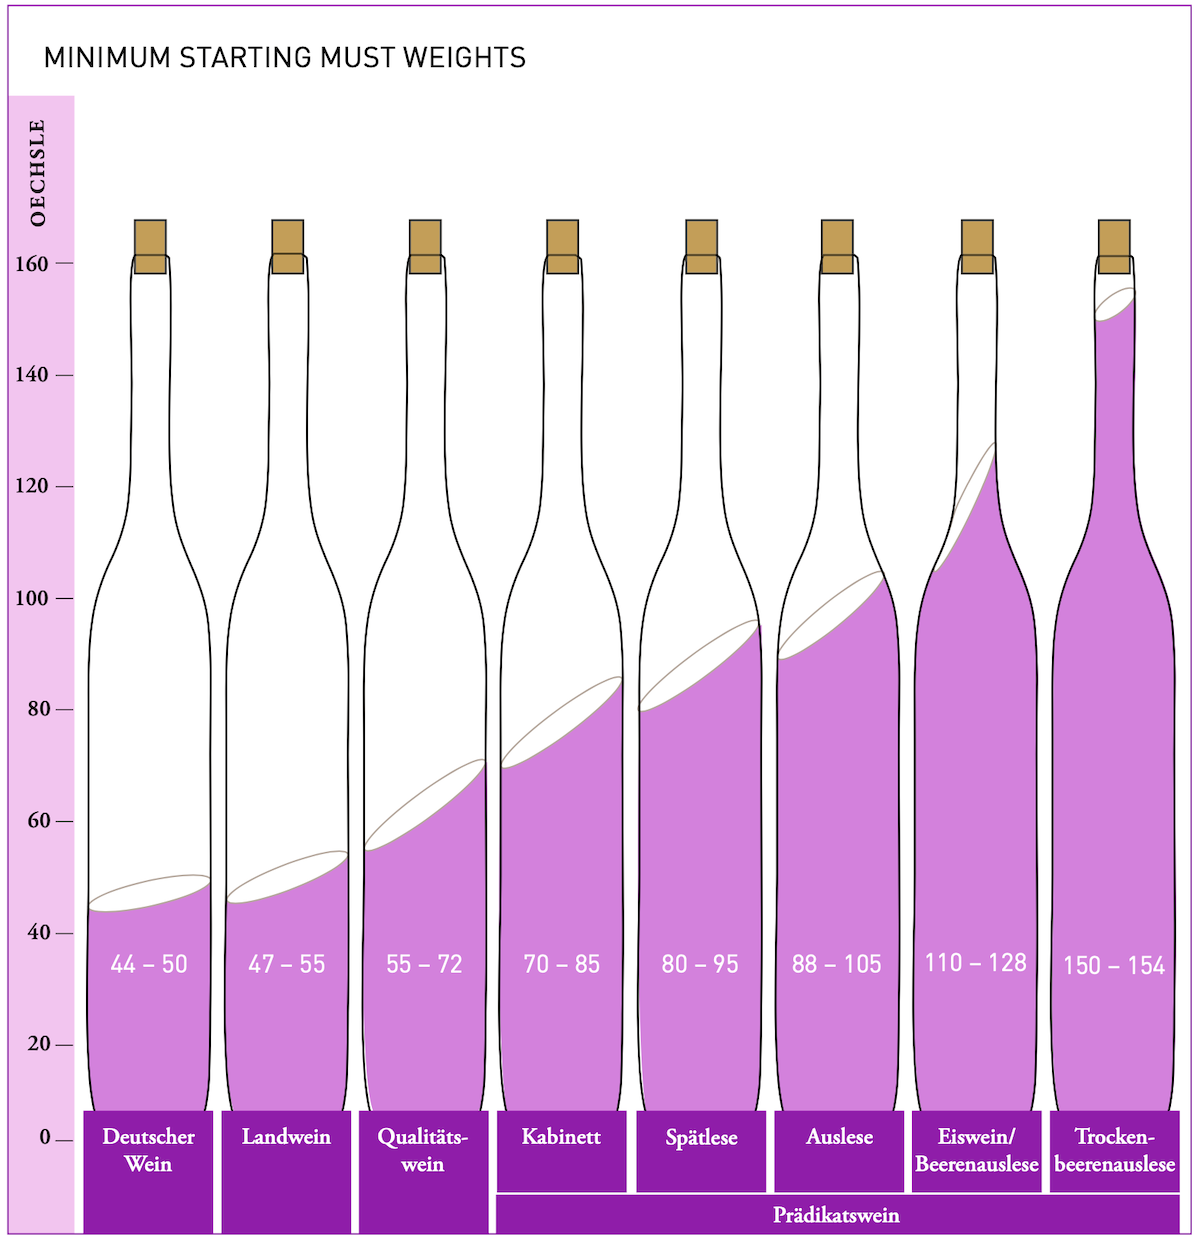 German wine law categories by minimum starting must weights